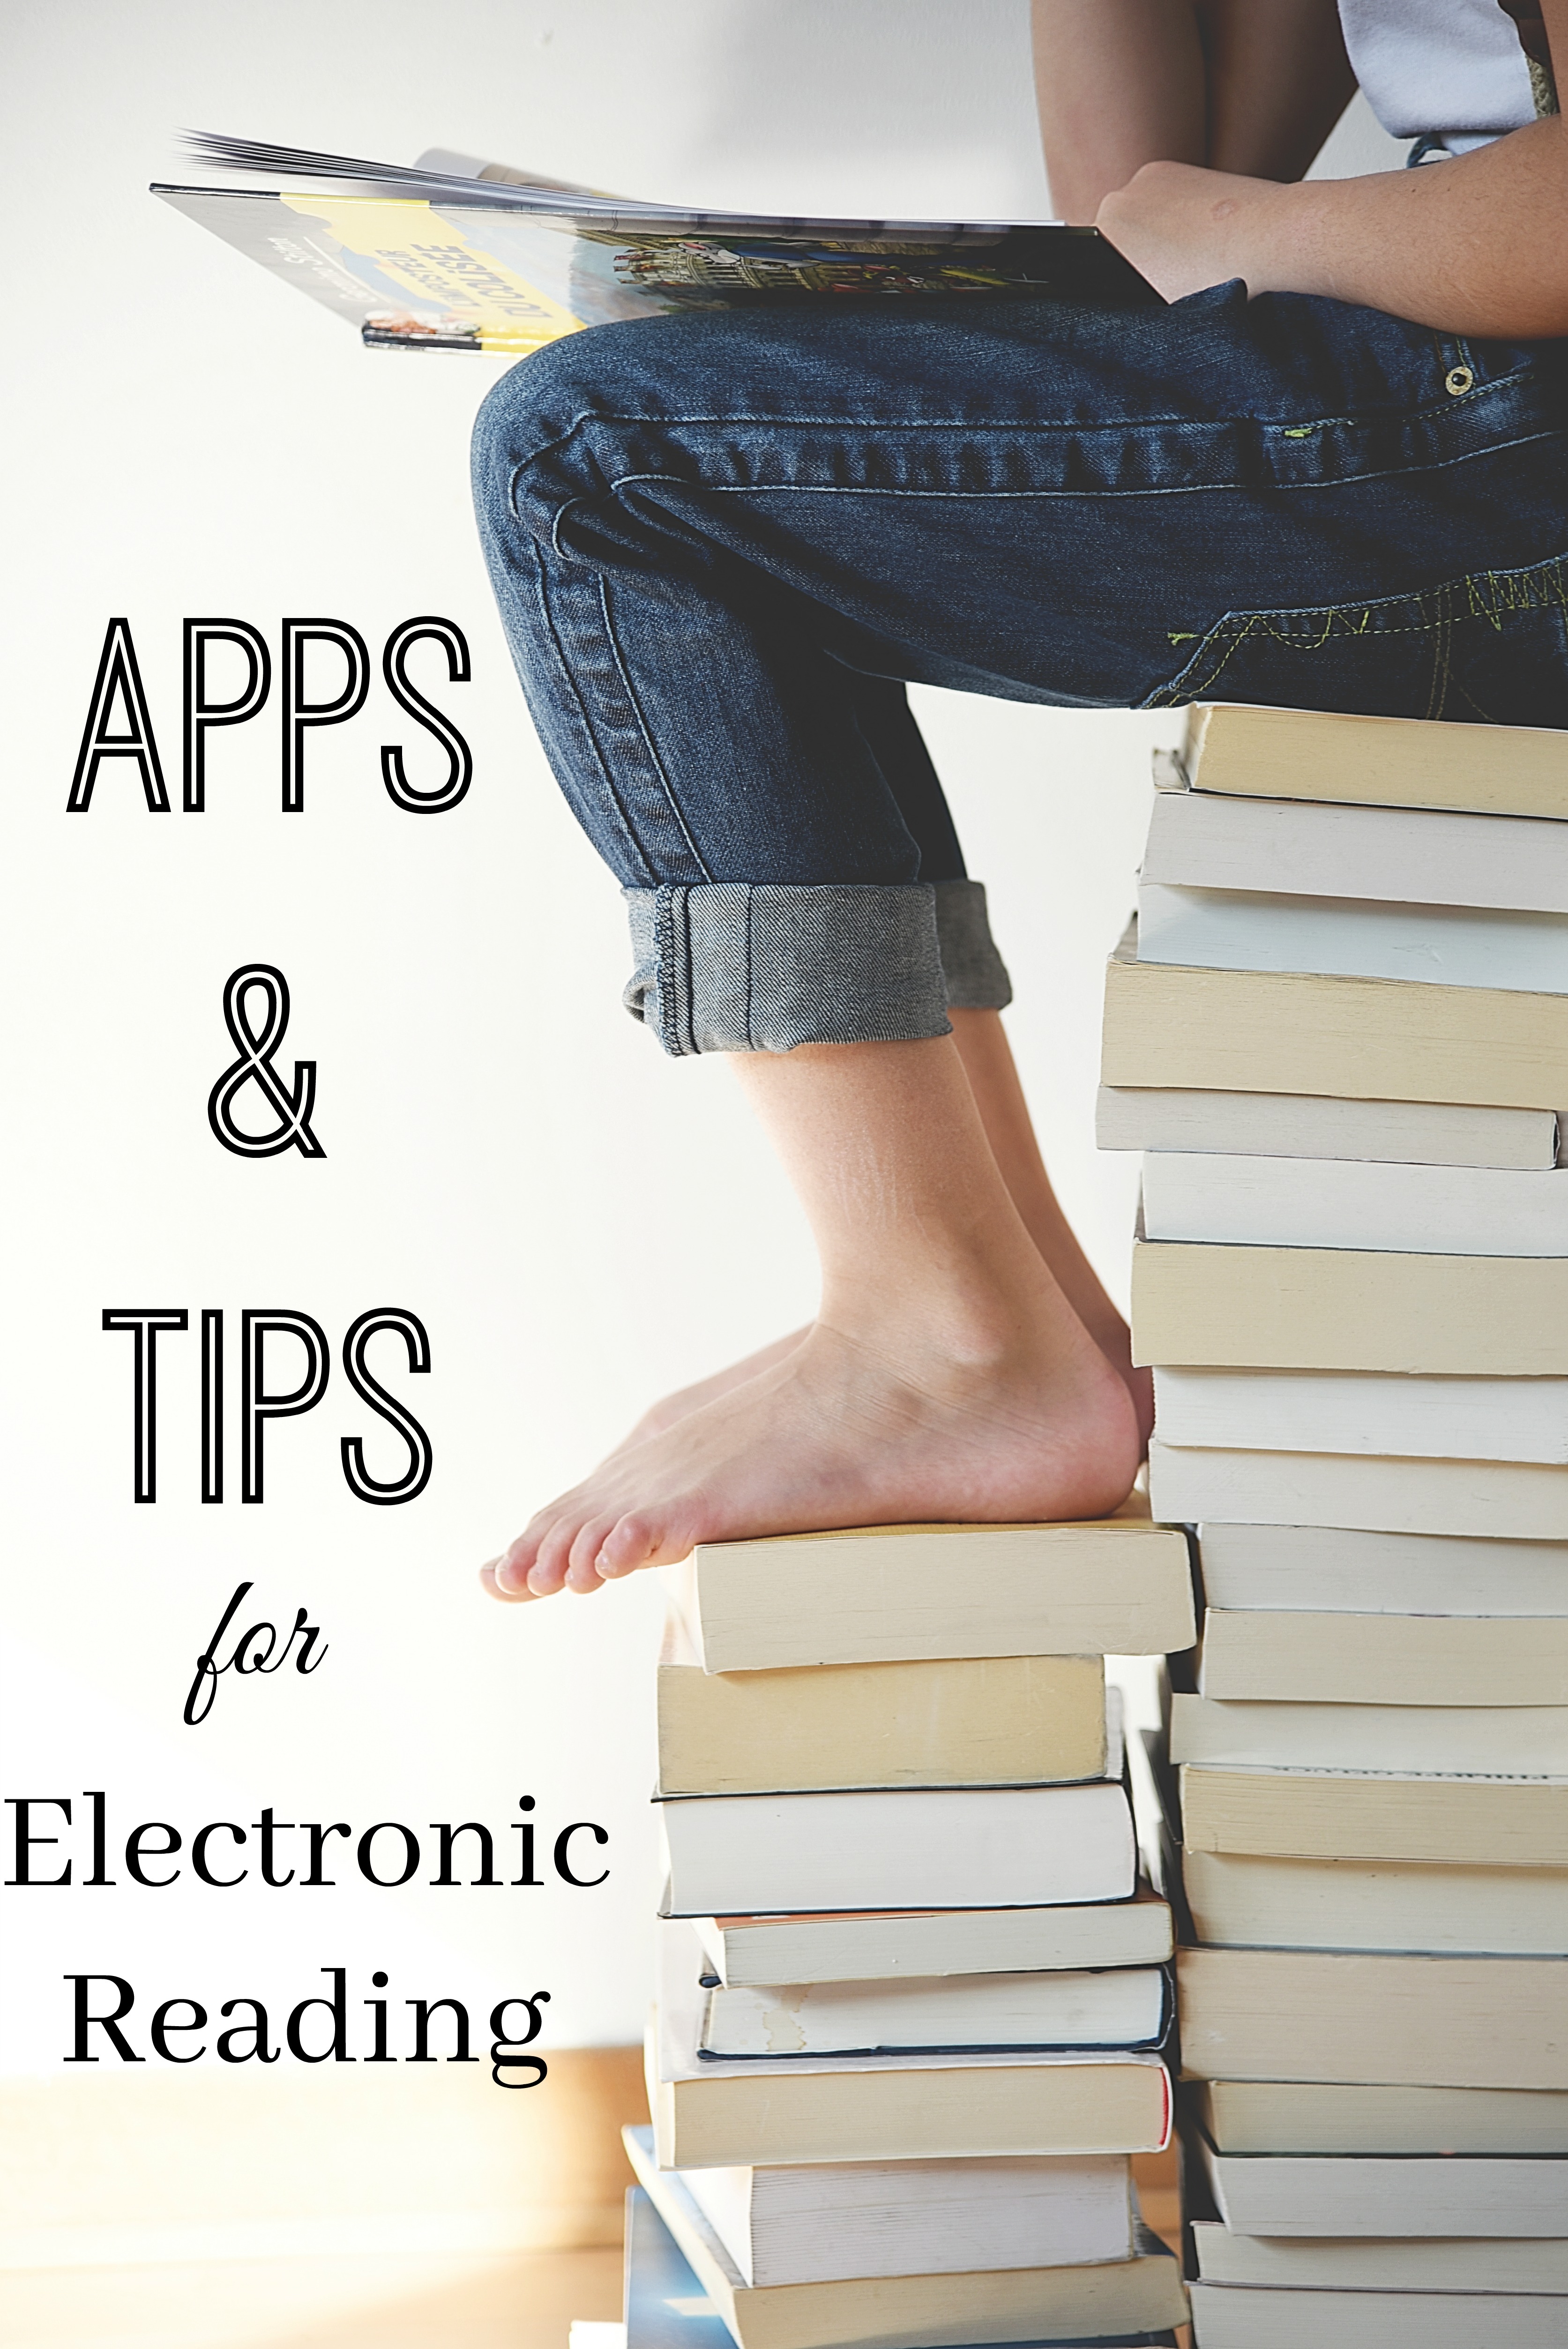 Electronic Reading Apps & Tips for National Reading Month